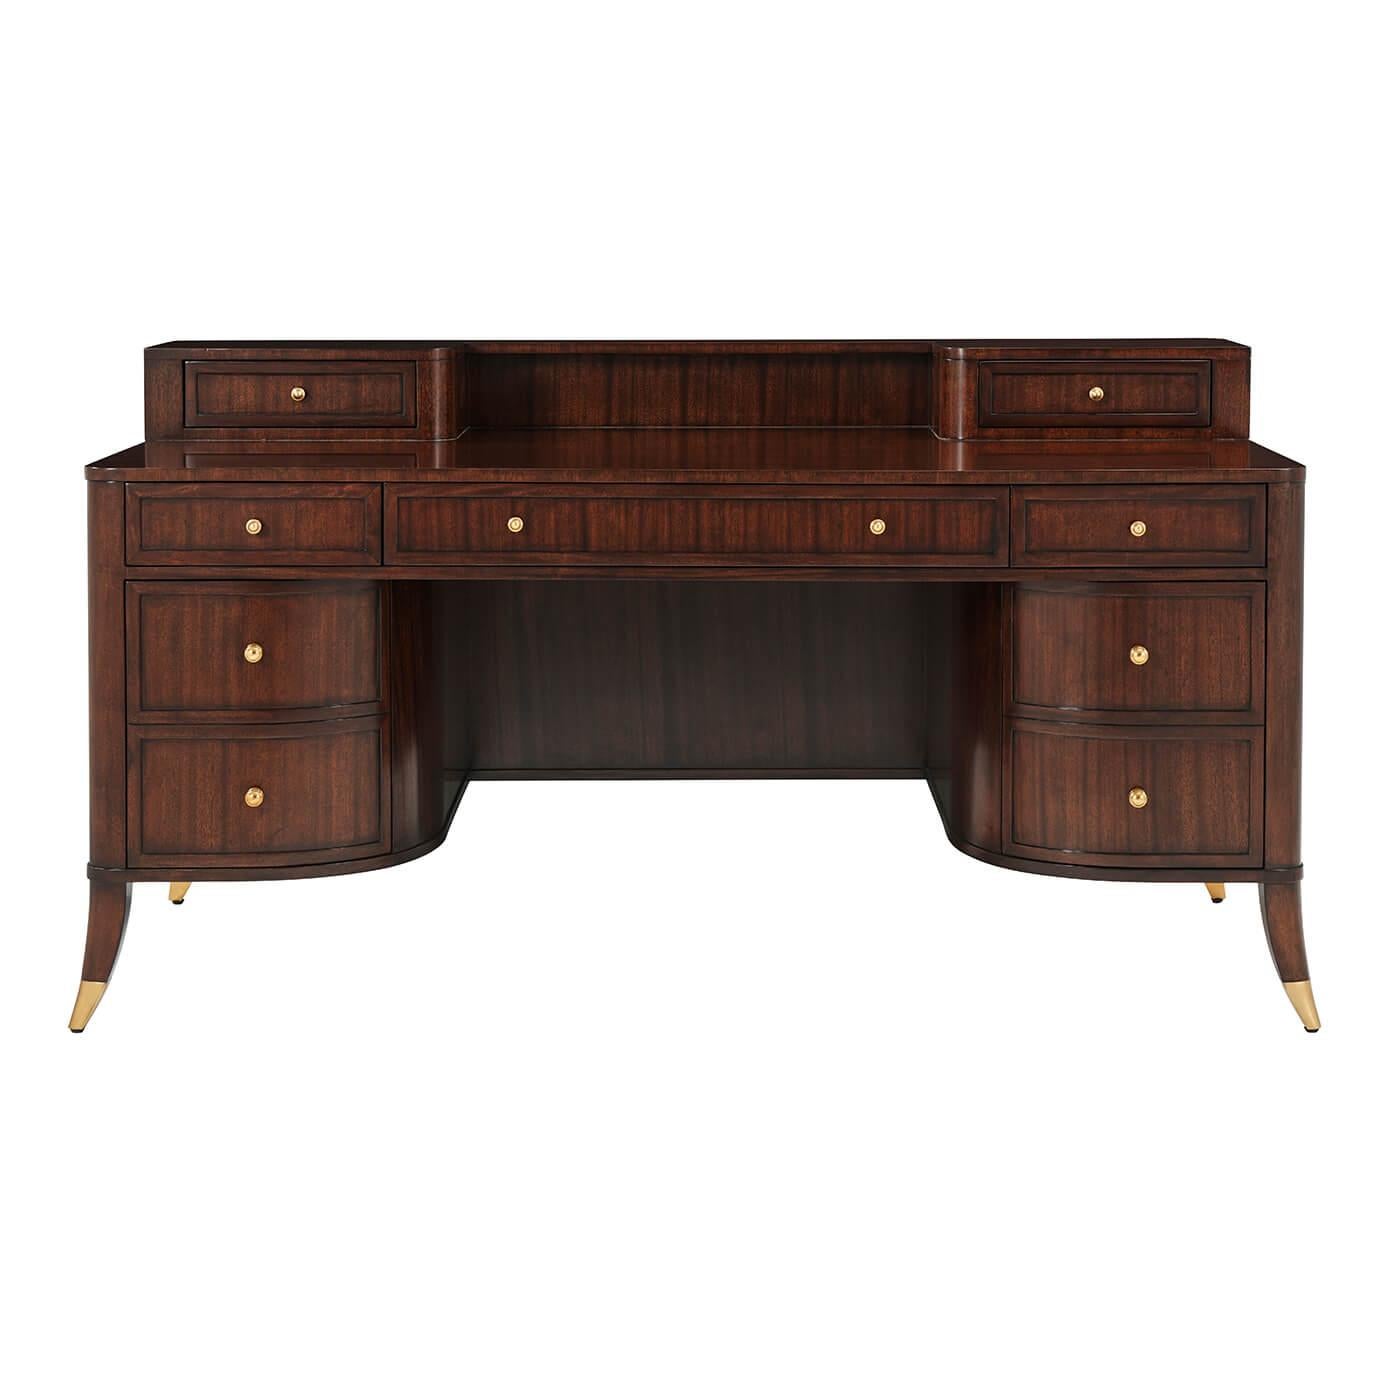 In the Ruhlman Manner, this French Art Deco desk, true to its French lineage, is a study in curves and angles. Two shapely filing drawers flank the kneehole. The mahogany desktop is ready to work with a two-drawer superstructure, and at the frieze,